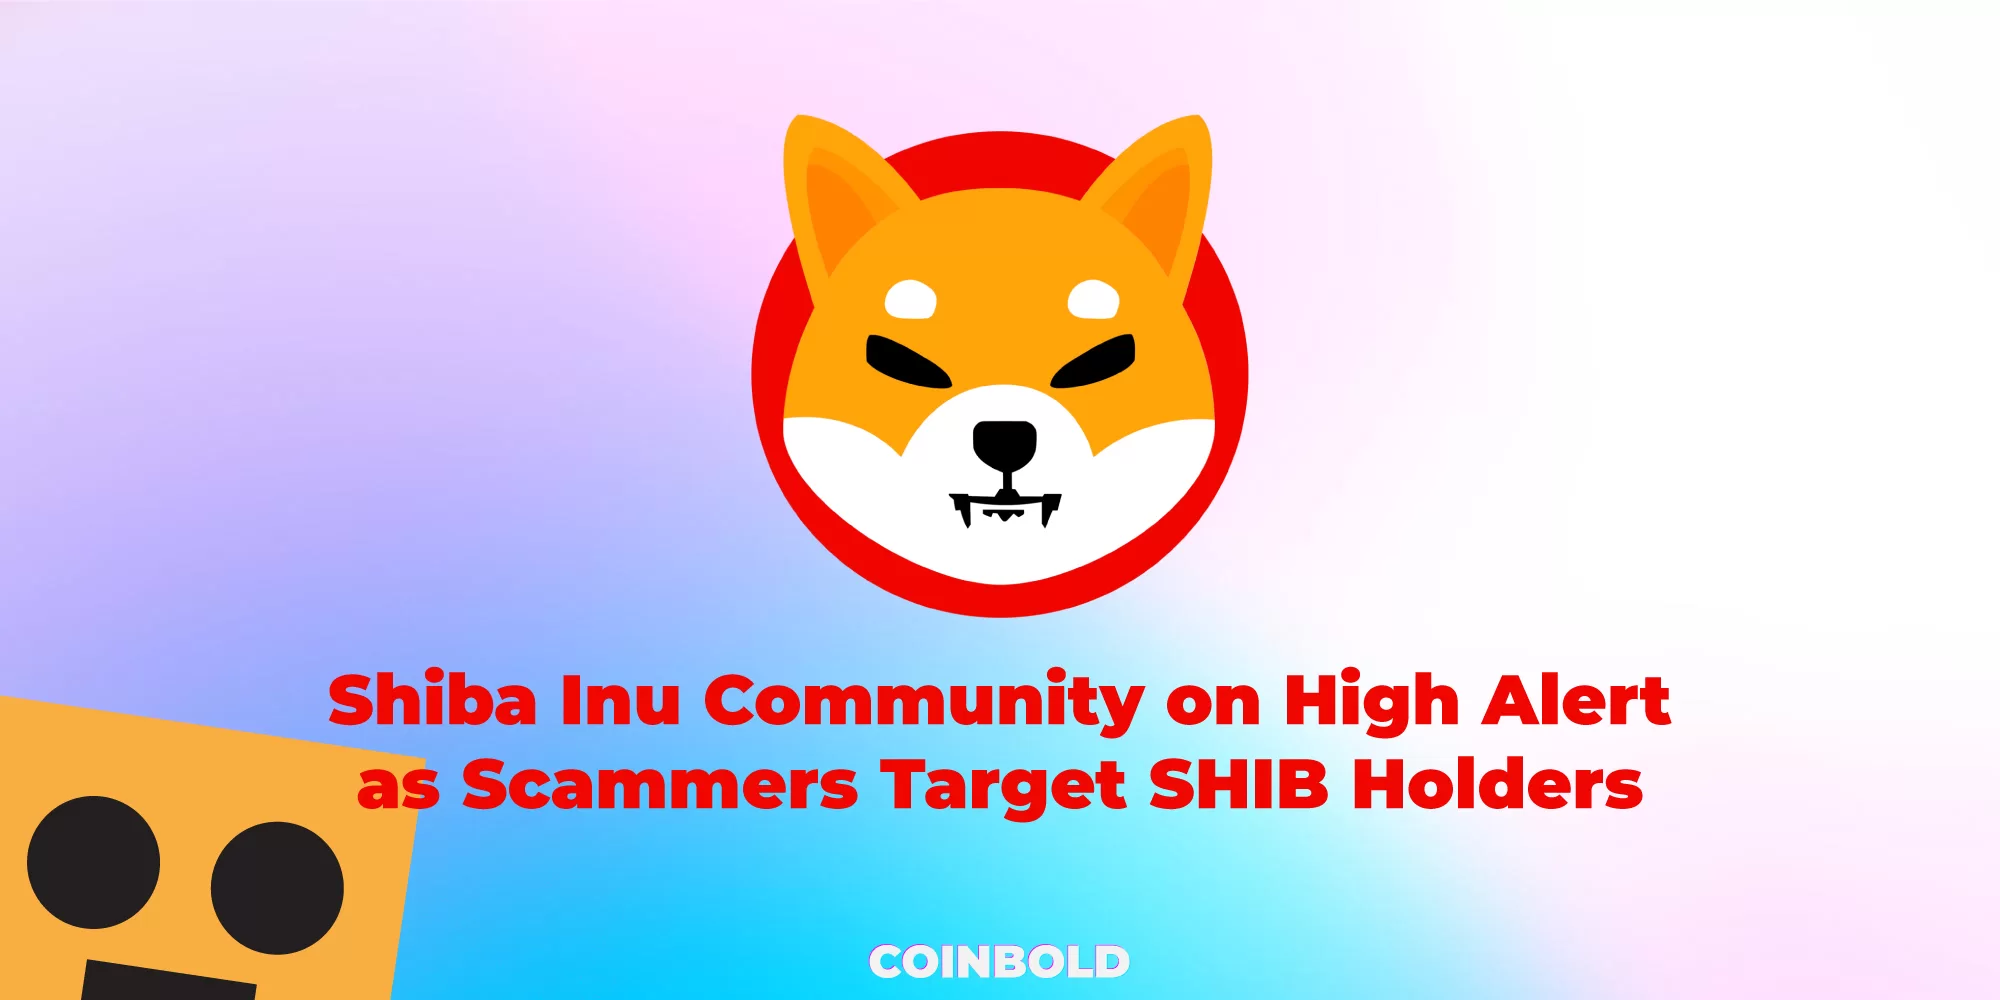 Shiba Inu Community on High Alert as Scammers Target SHIB Holders